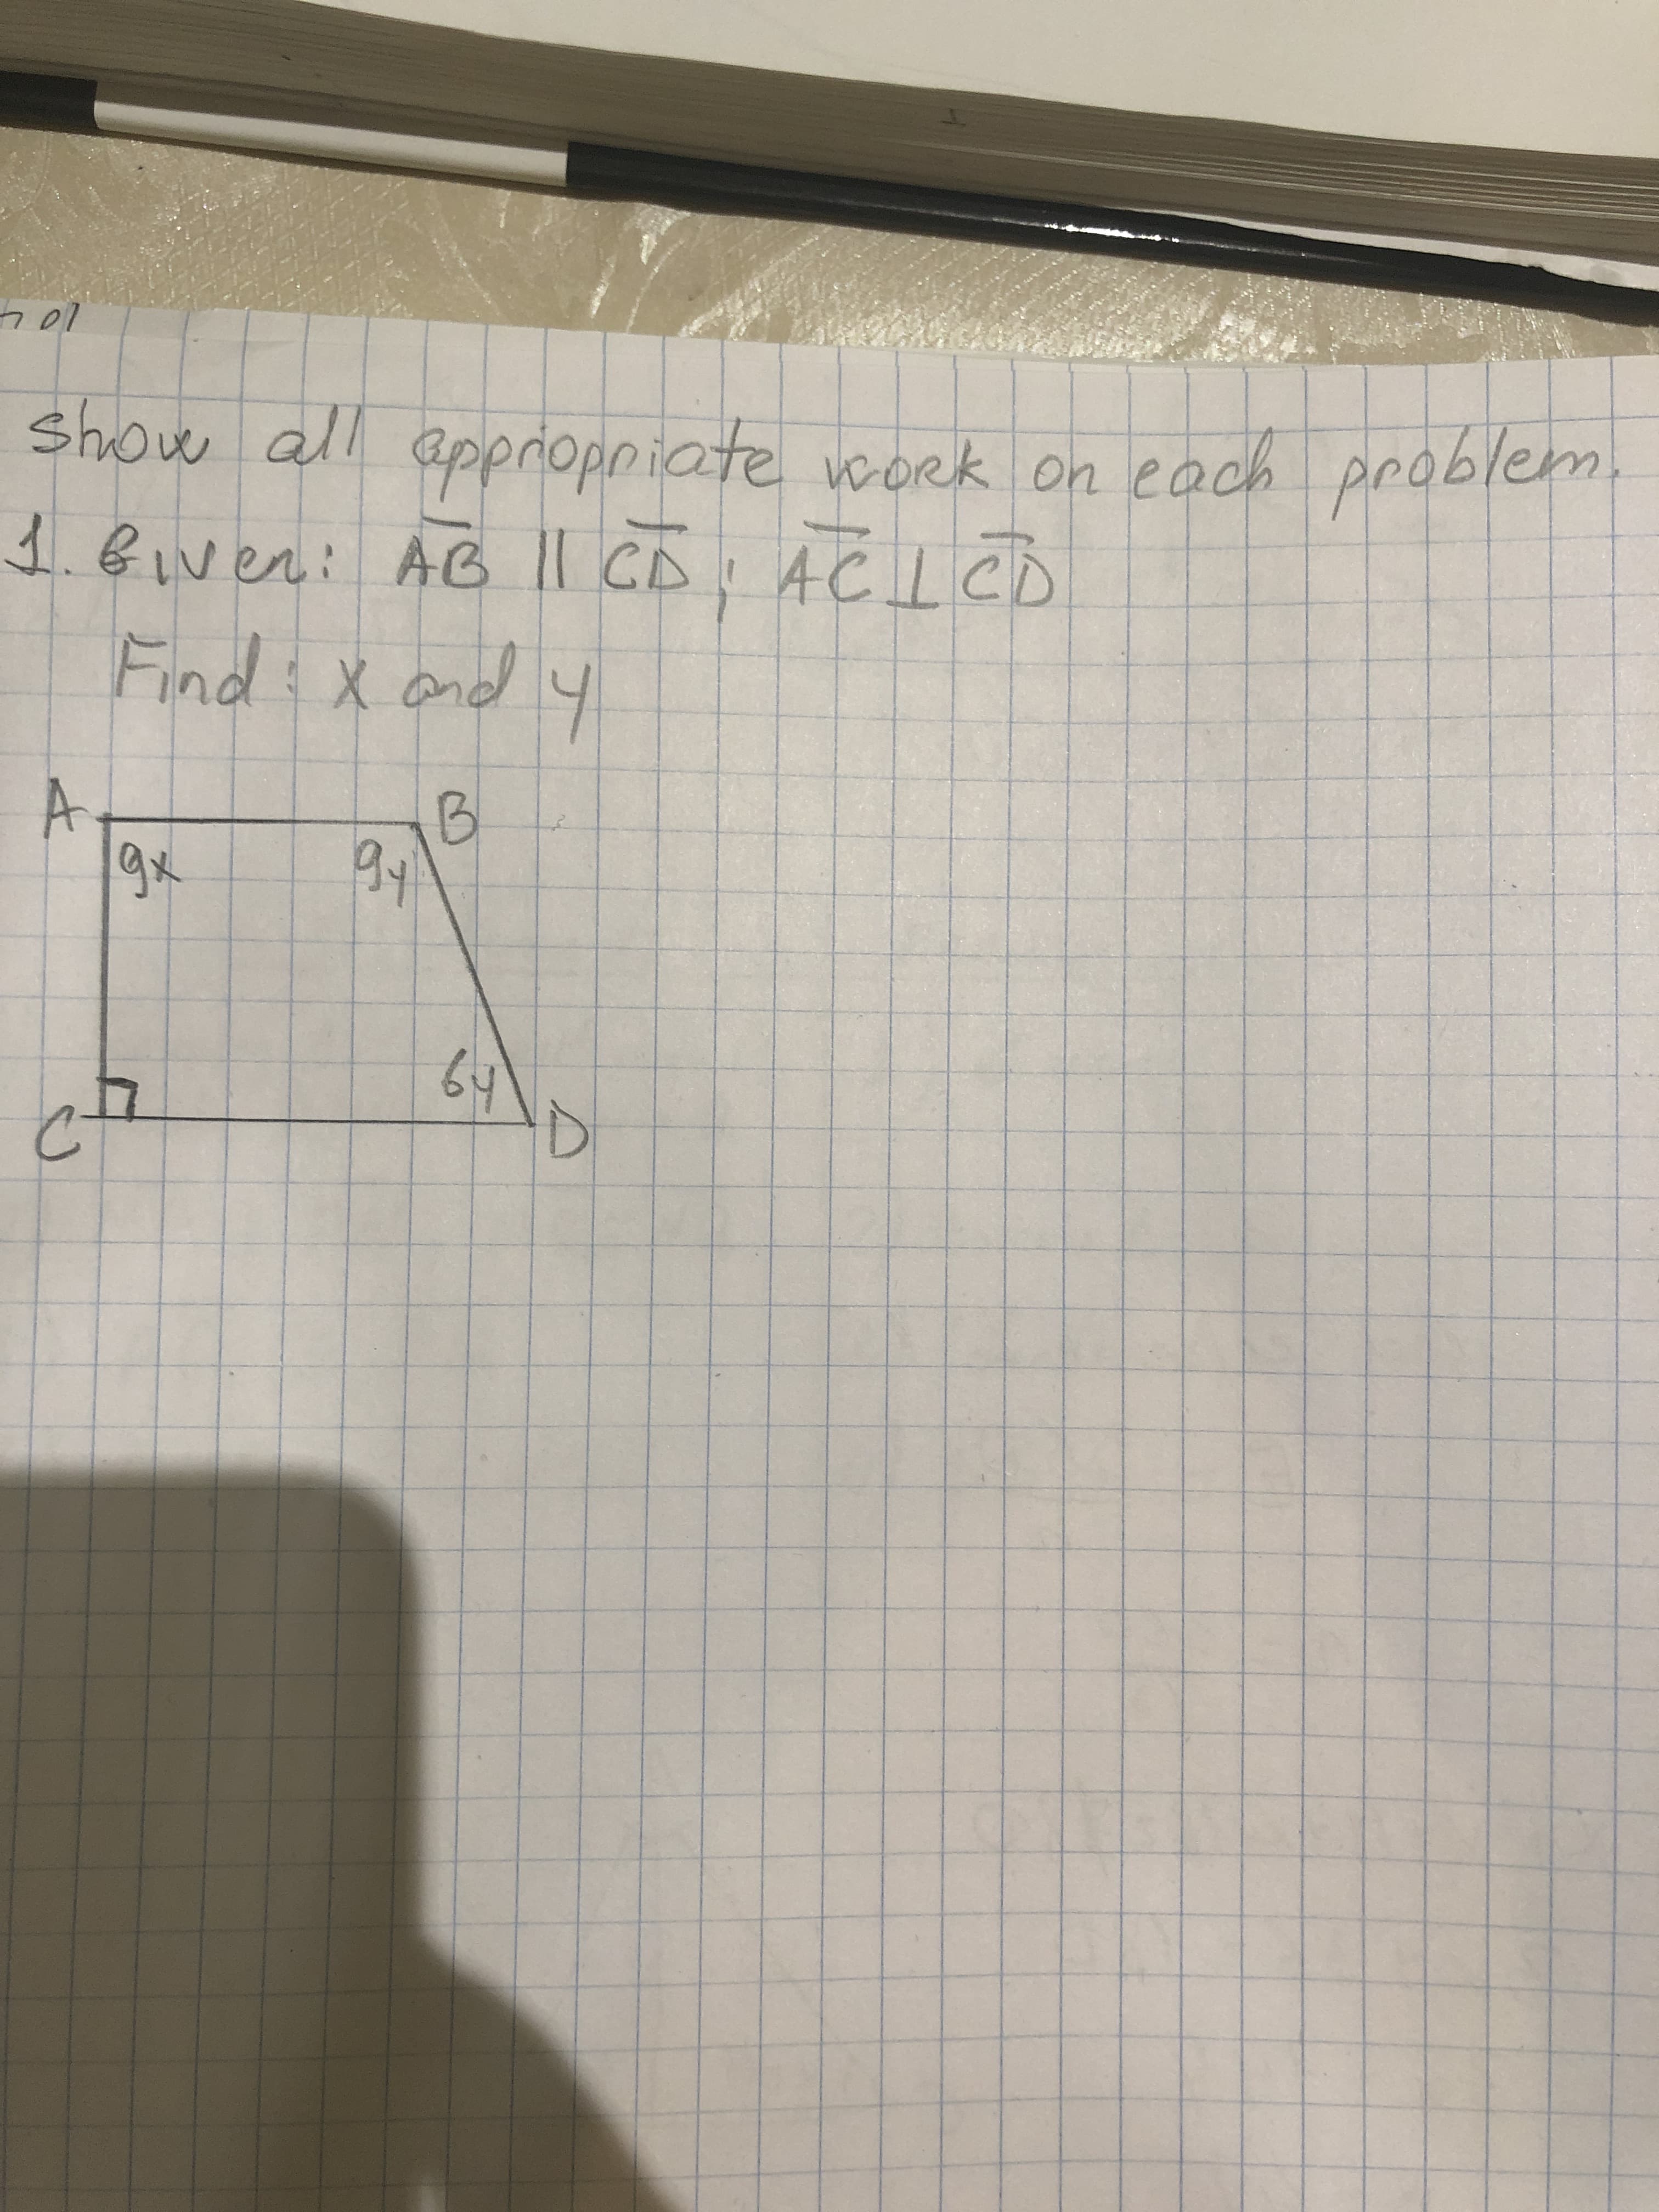 104
Show all appriopniate work on each problem.
1.6.ven: AB11 CD ACICD
Find X and y
4
B.
gx
